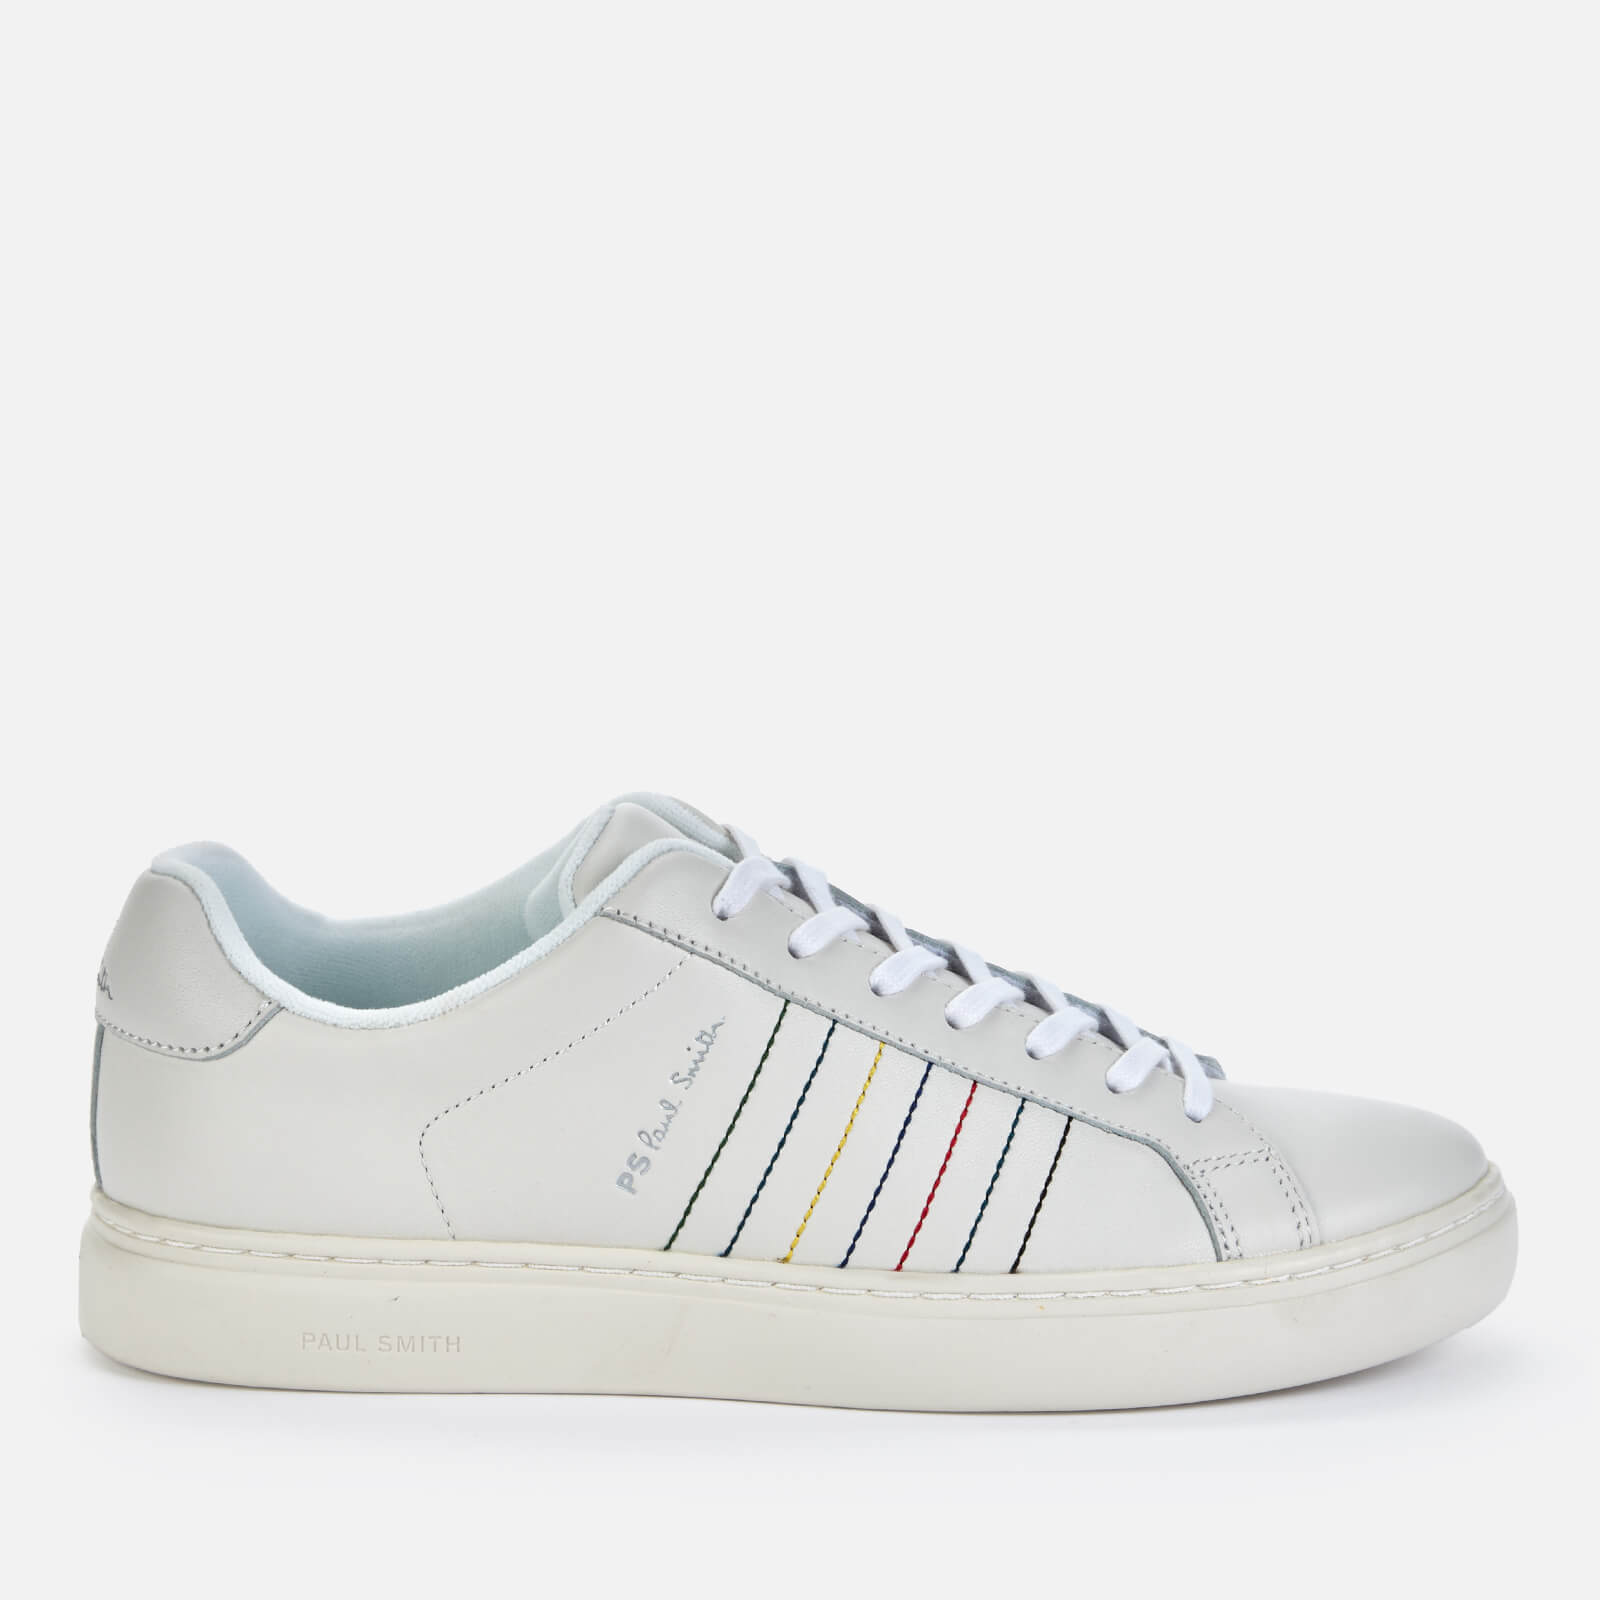 PS Paul Smith Men's Rex Embroidered Stripe Leather Trainers - White - UK 11